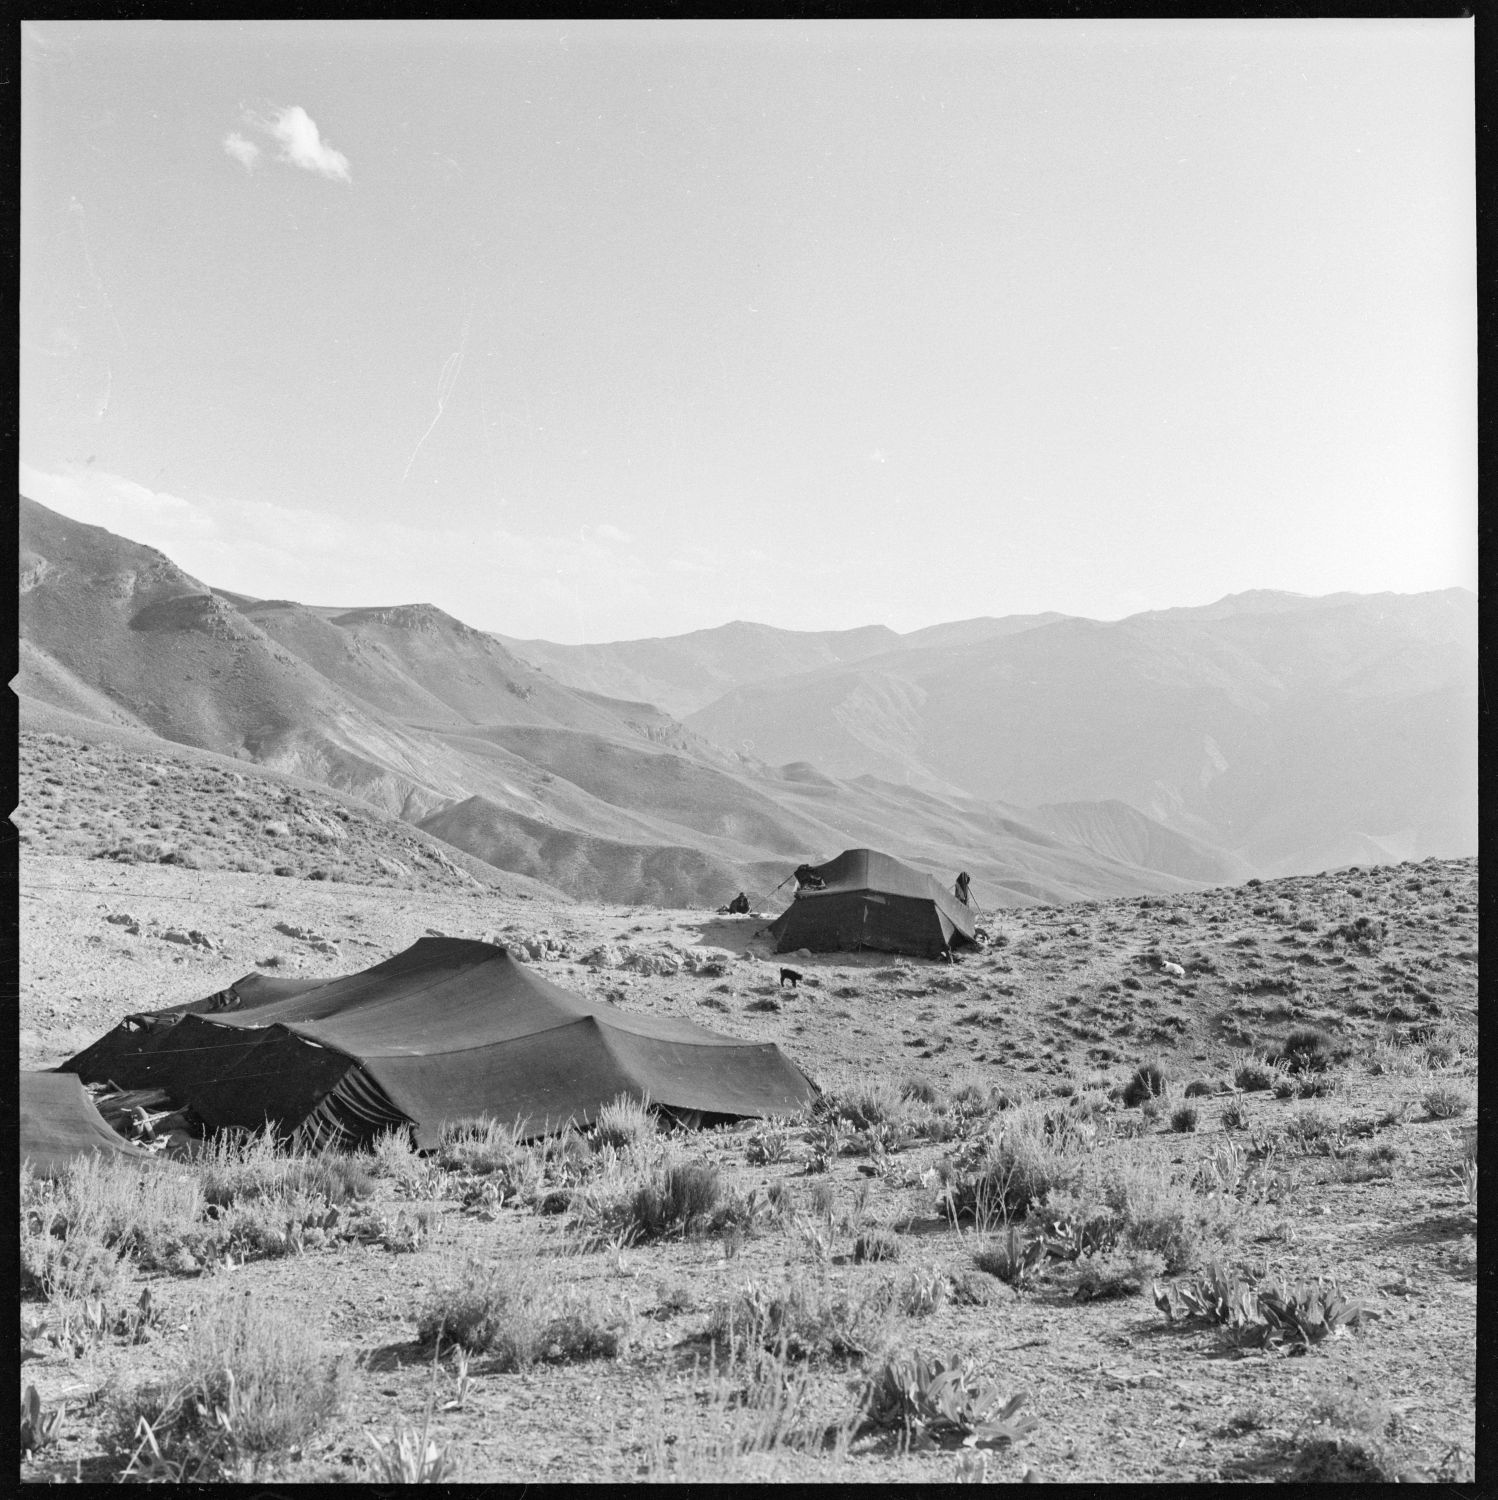 Normad tents sit on ridge overlooking deep gorge in the vicinity of Jam, Afghanistan.